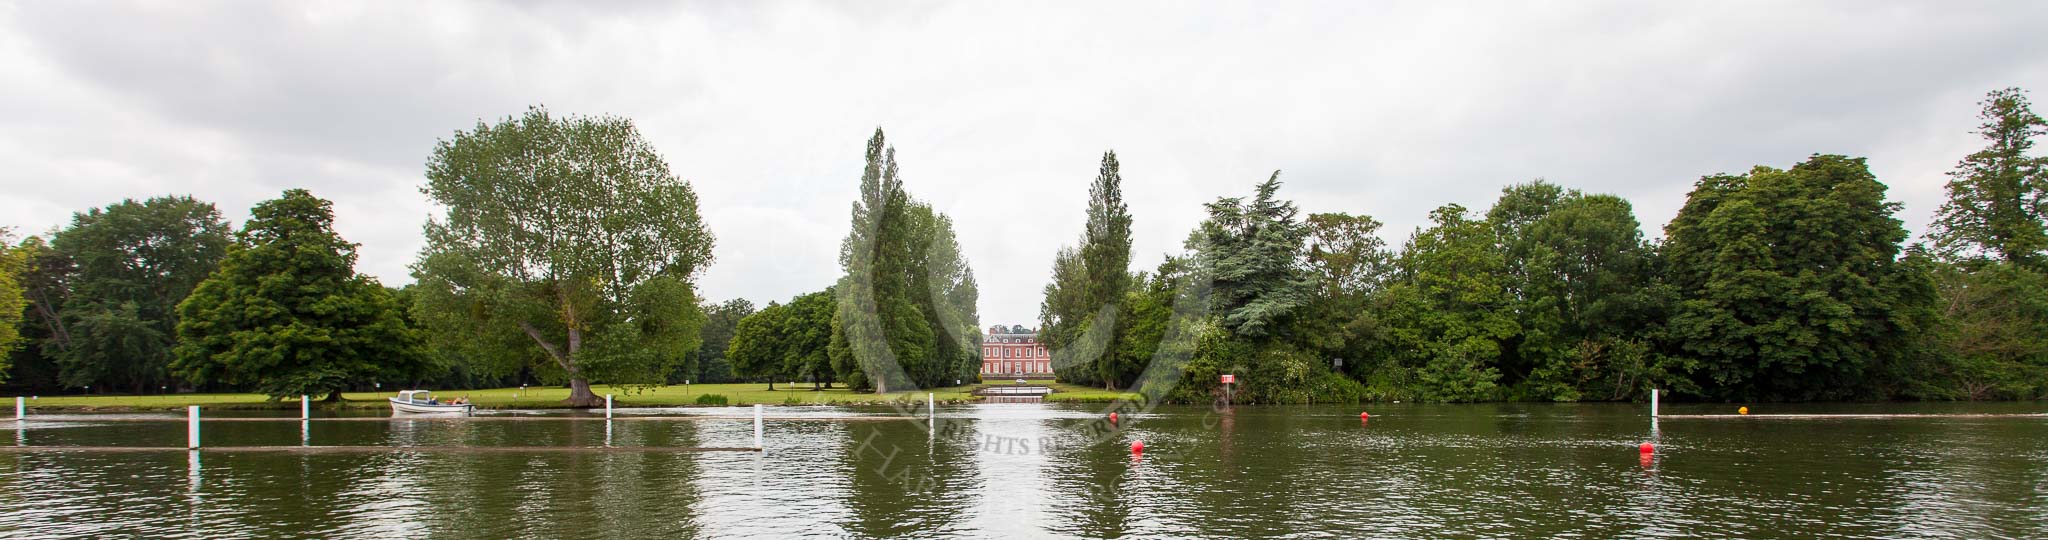 Henley Royal Regatta 2013 (Monday): Fawley Court, around the 1/2-mile marker on the Oxfordshire side of the Thames, designed by Christopher Wren, and landscaping by Capability Brown..
River Thames between Henley and Temple Island,
Henley-on-Thames,
Berkshire,
United Kingdom,
on 01 July 2013 at 14:49, image #21